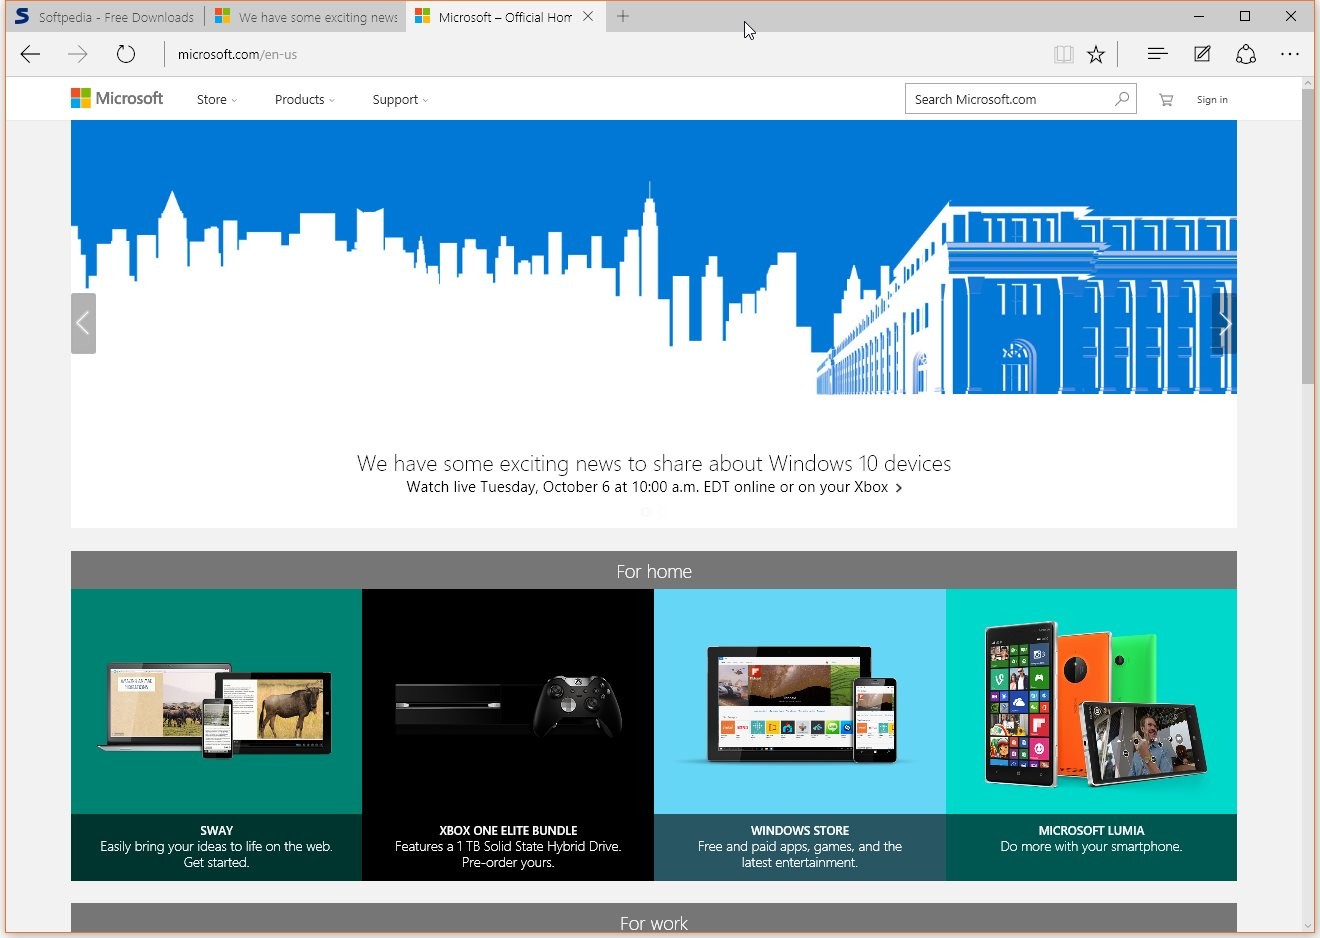 how to update edge browser xbox one